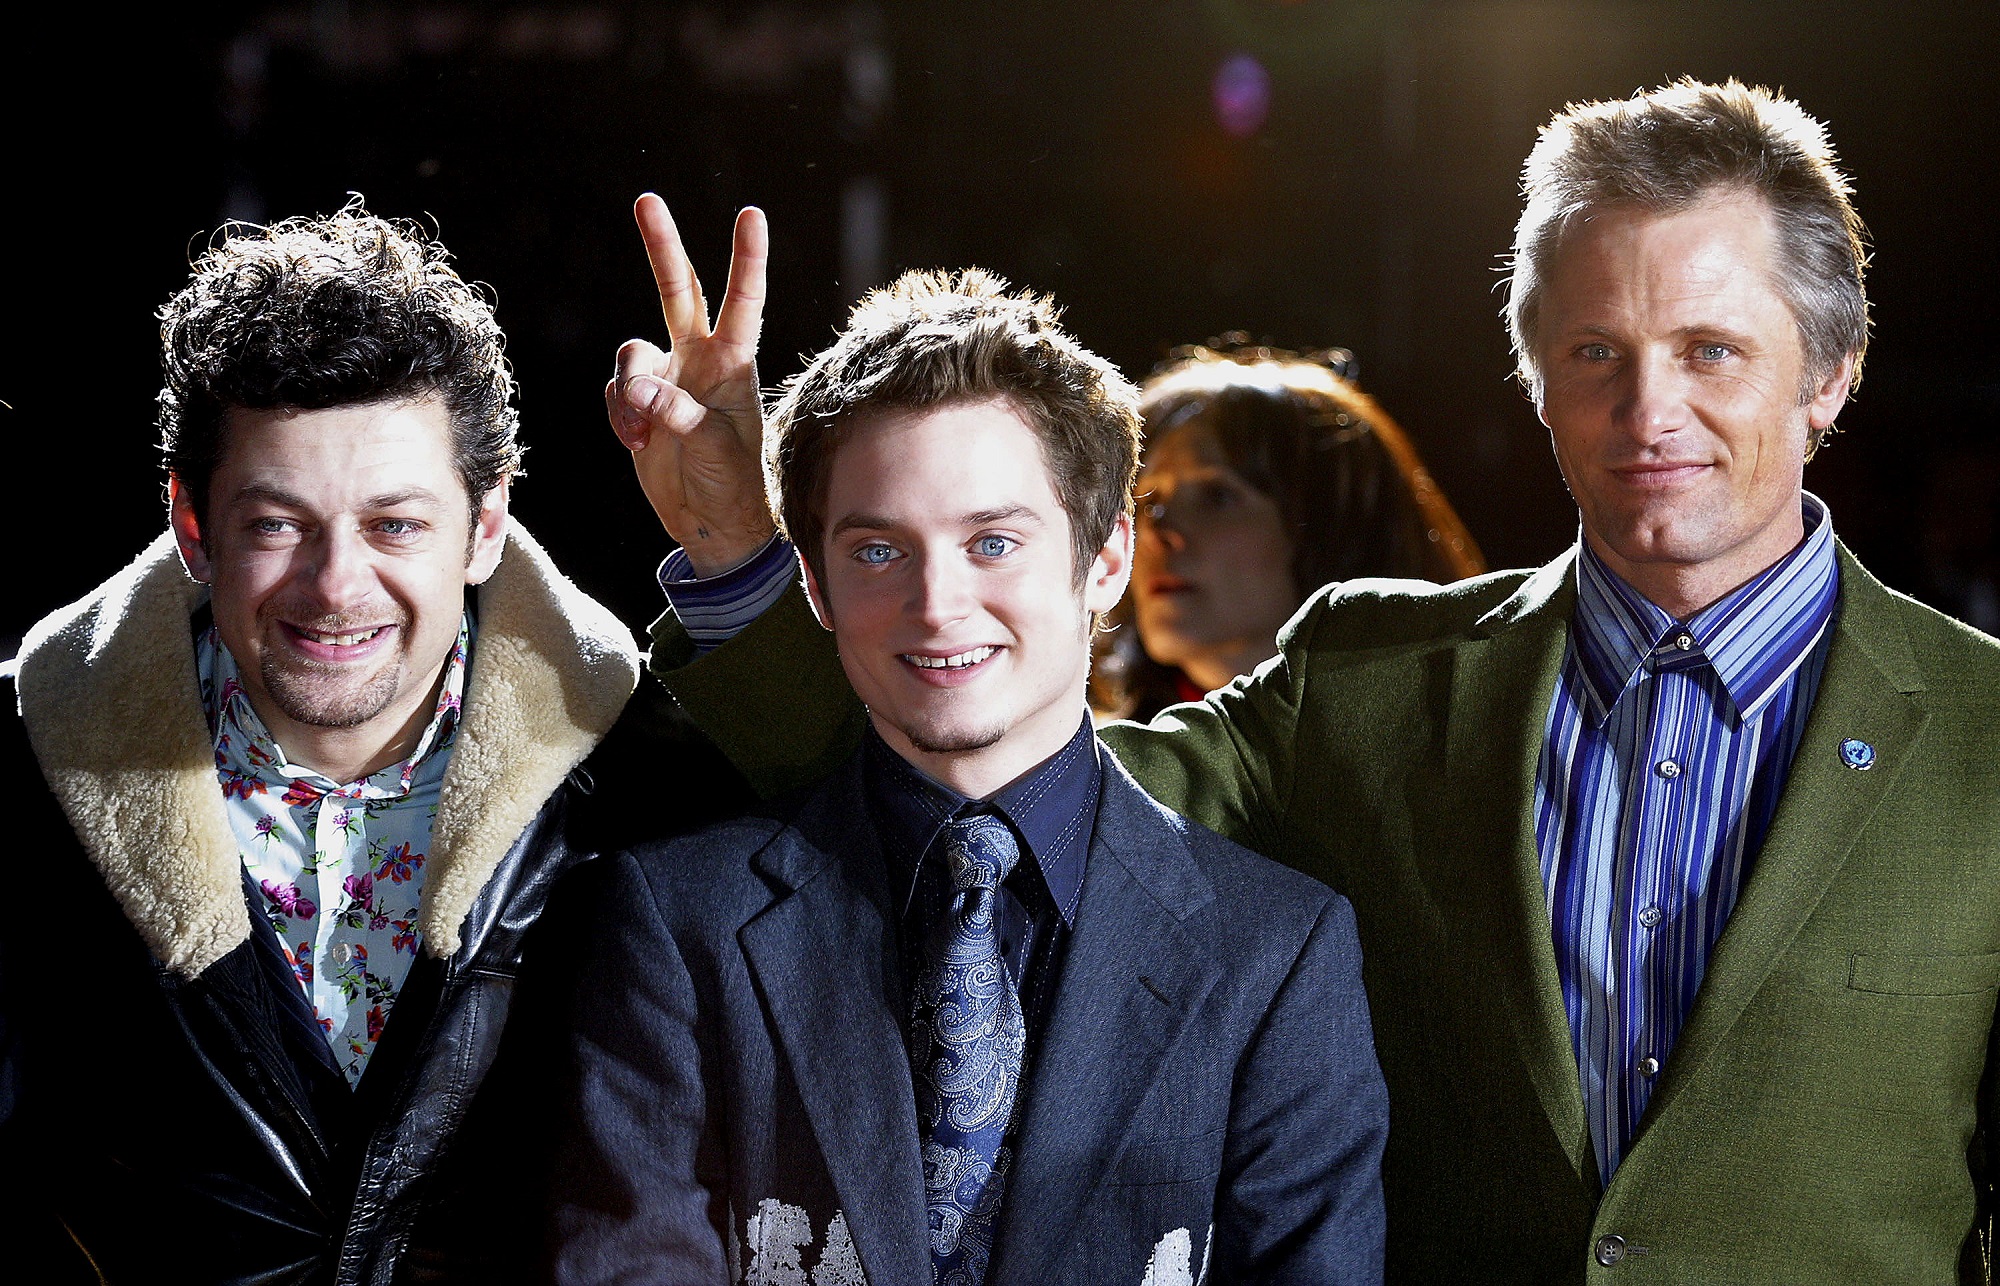 Andy Serkis, Elijah Wood, and Viggo Mortensen of Lord of the Rings